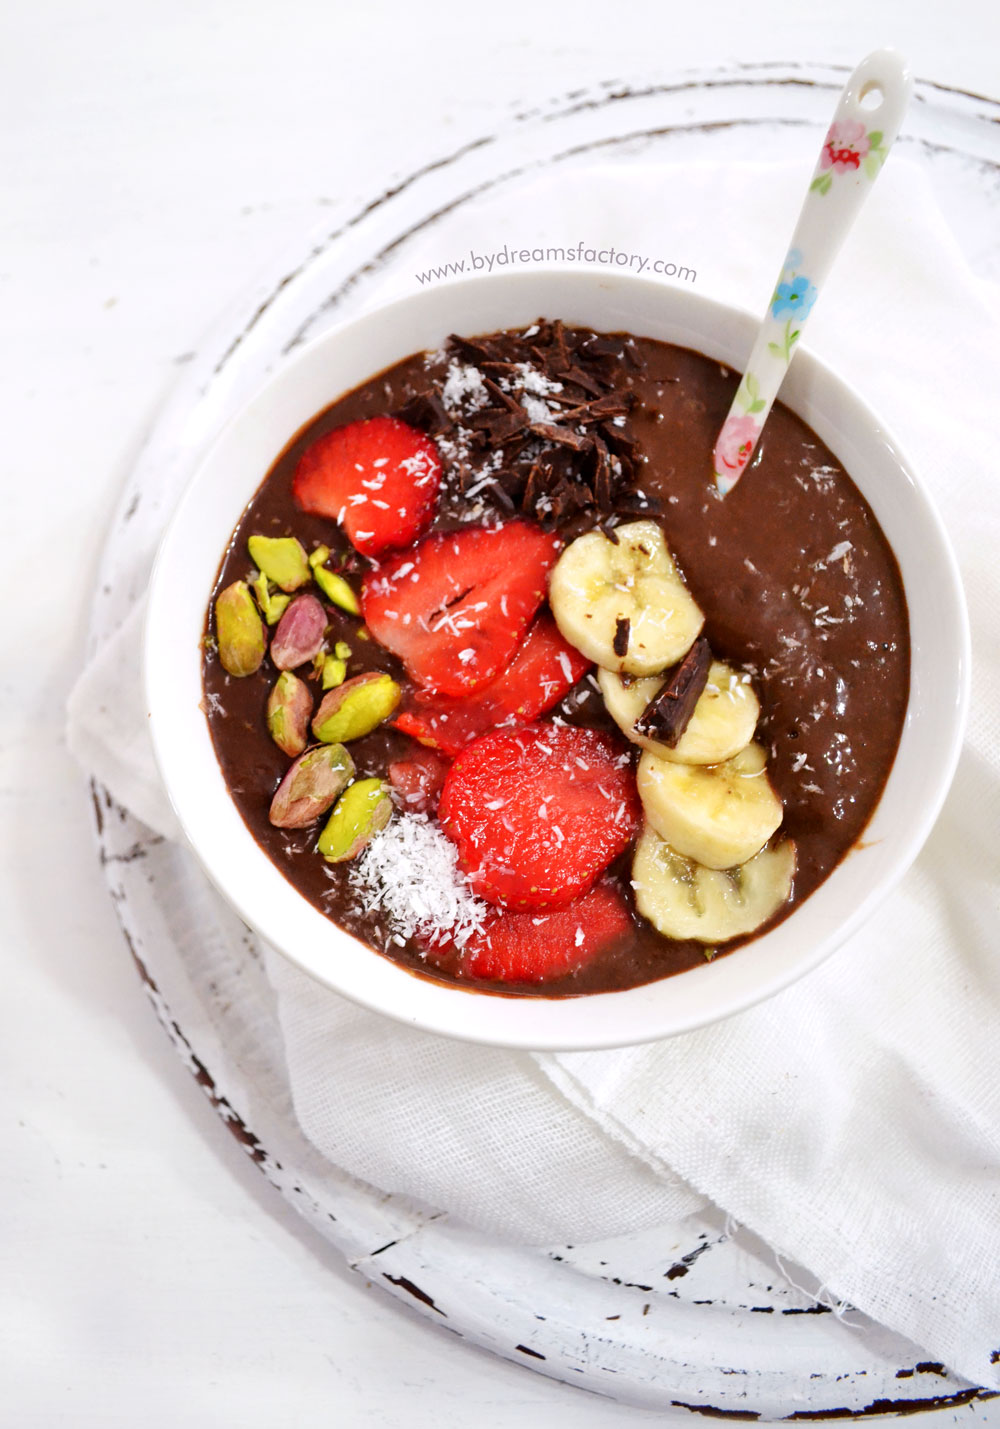 Make the perfect chocoholic smoothie bowl and think of it as a blank canvas. Get creative and play with different textures and colors and create visually appealing but also incredibly delicious pieces. Use your imagination and paint your vision using different shaped fruits, seeds, coconut flakes and your favorite superfoods. | Dreams Factory